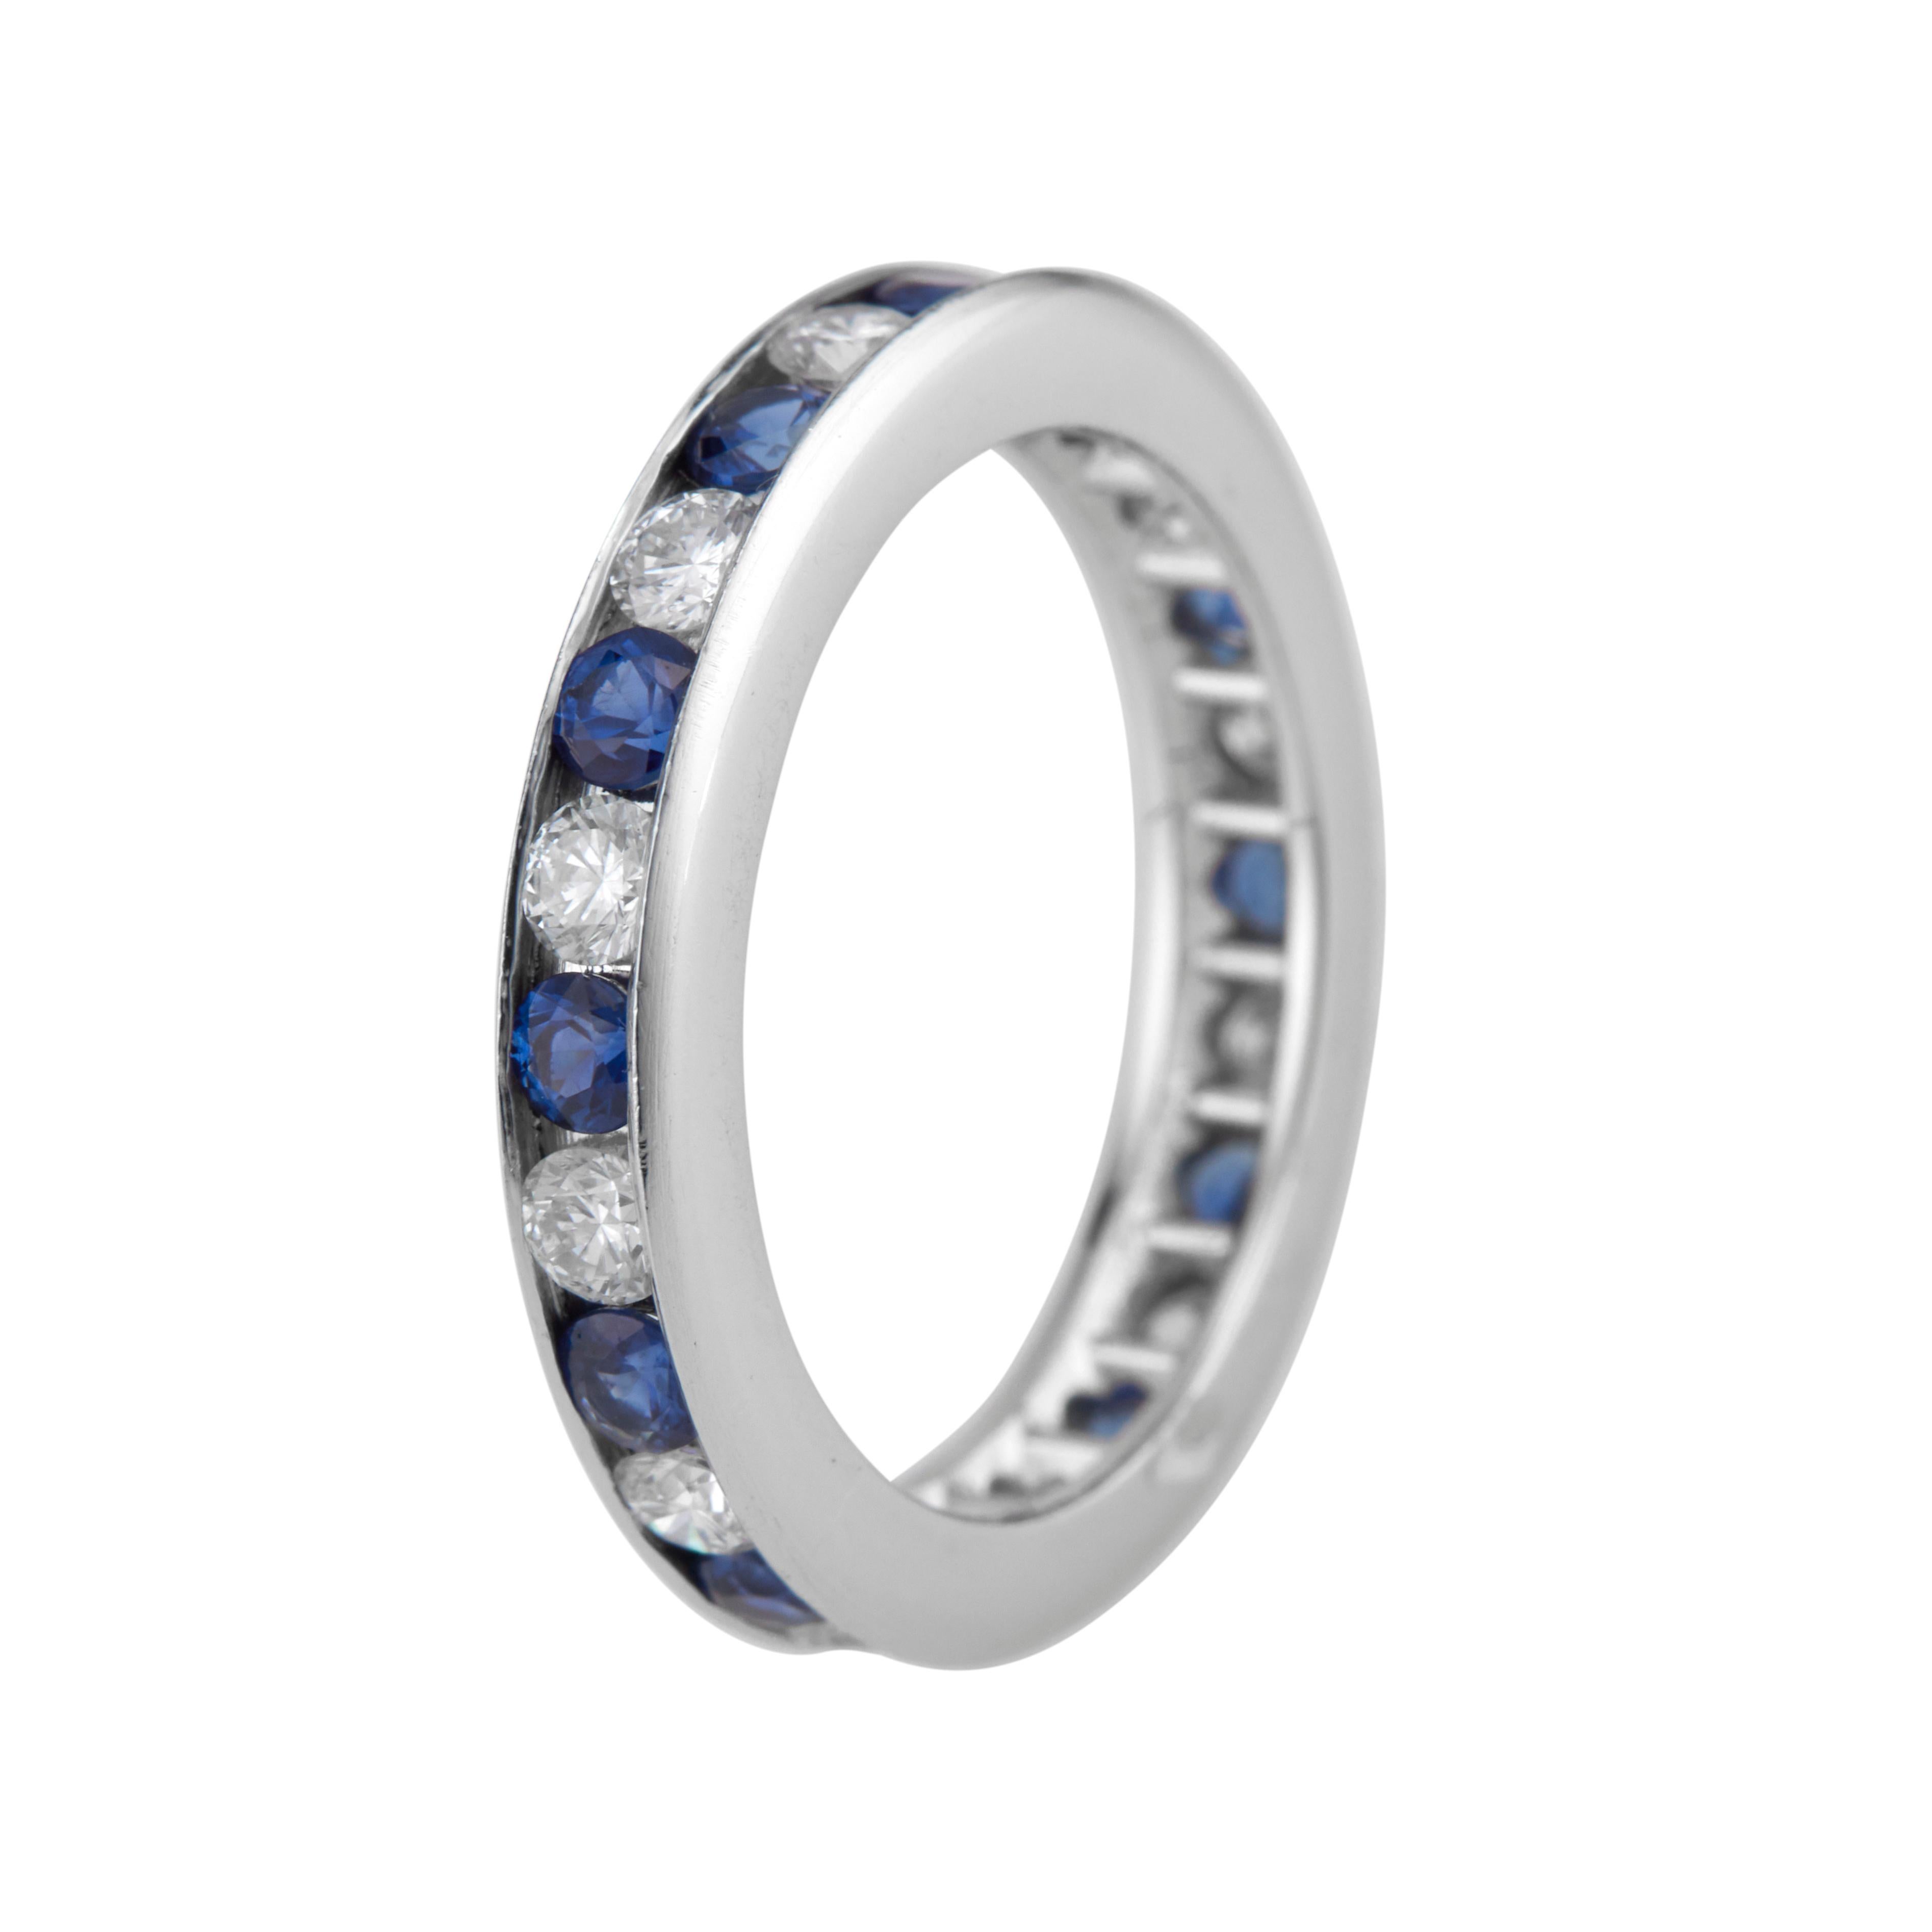 Sapphire diamond eternity wedding band. 12 round diamonds alternating with 12 round sapphires in a platinum setting. 

12 round cut diamond approx. total weight .72cts F, VS
12 round cut sapphires approx. total weight .70cts 
Size: 6 
Test platinum
